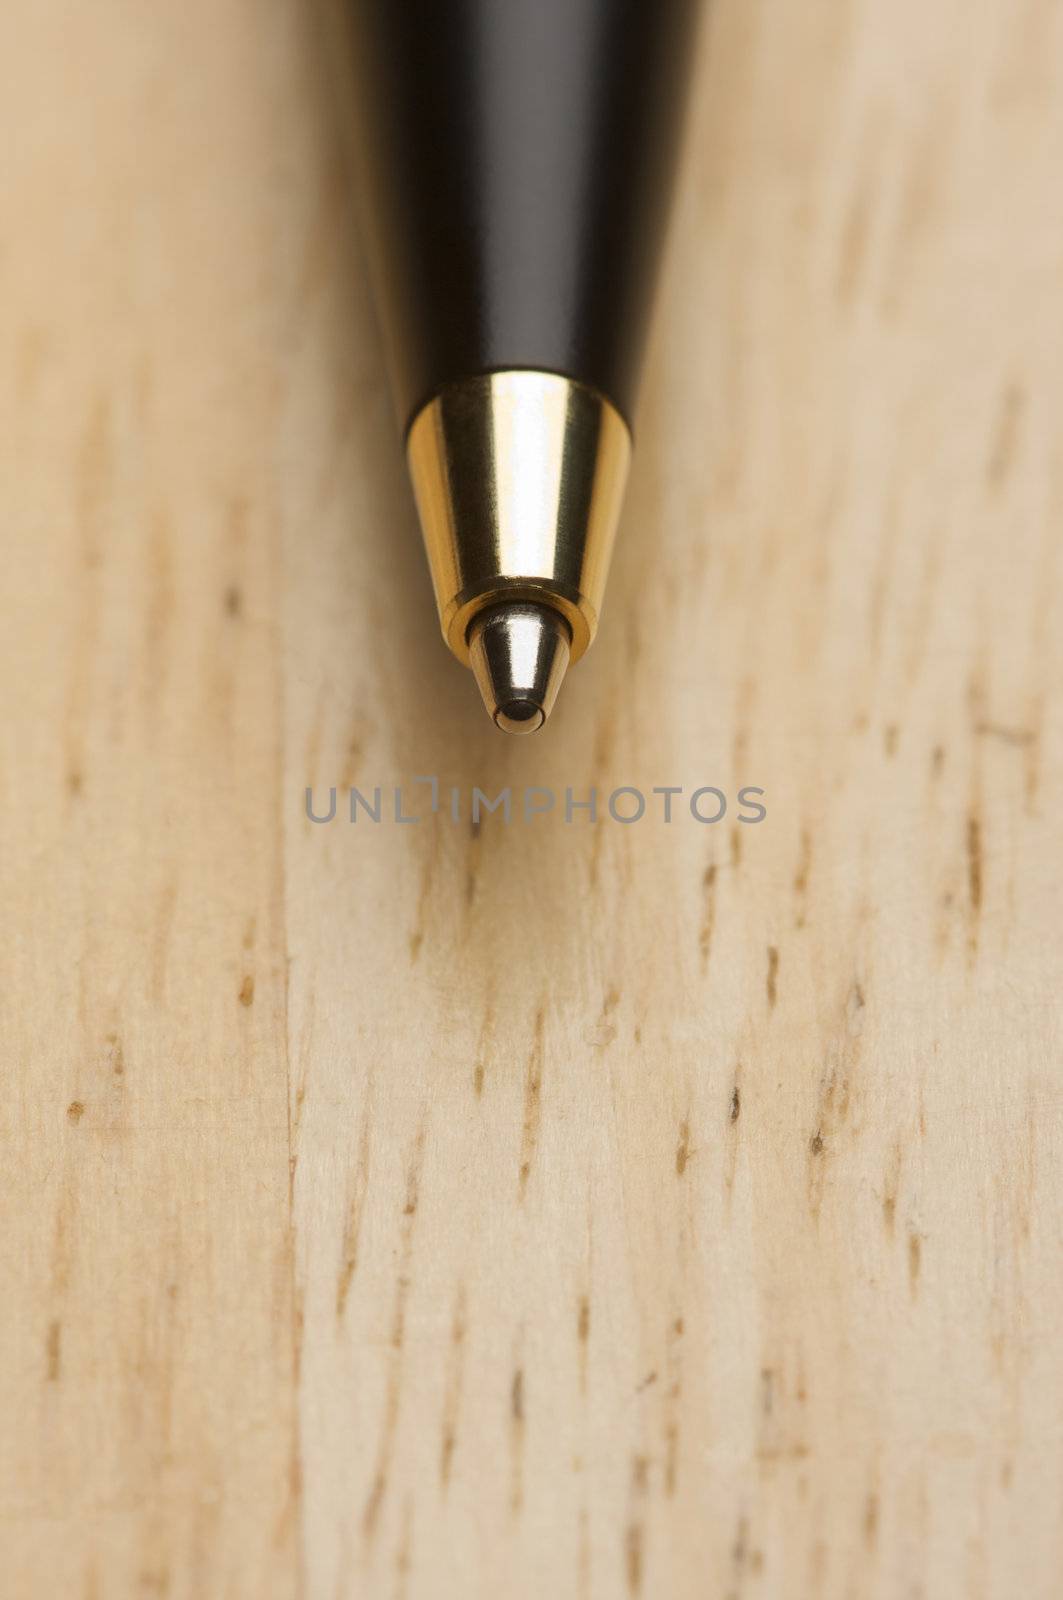 Ball Point Pen Macro on Wood by Feverpitched